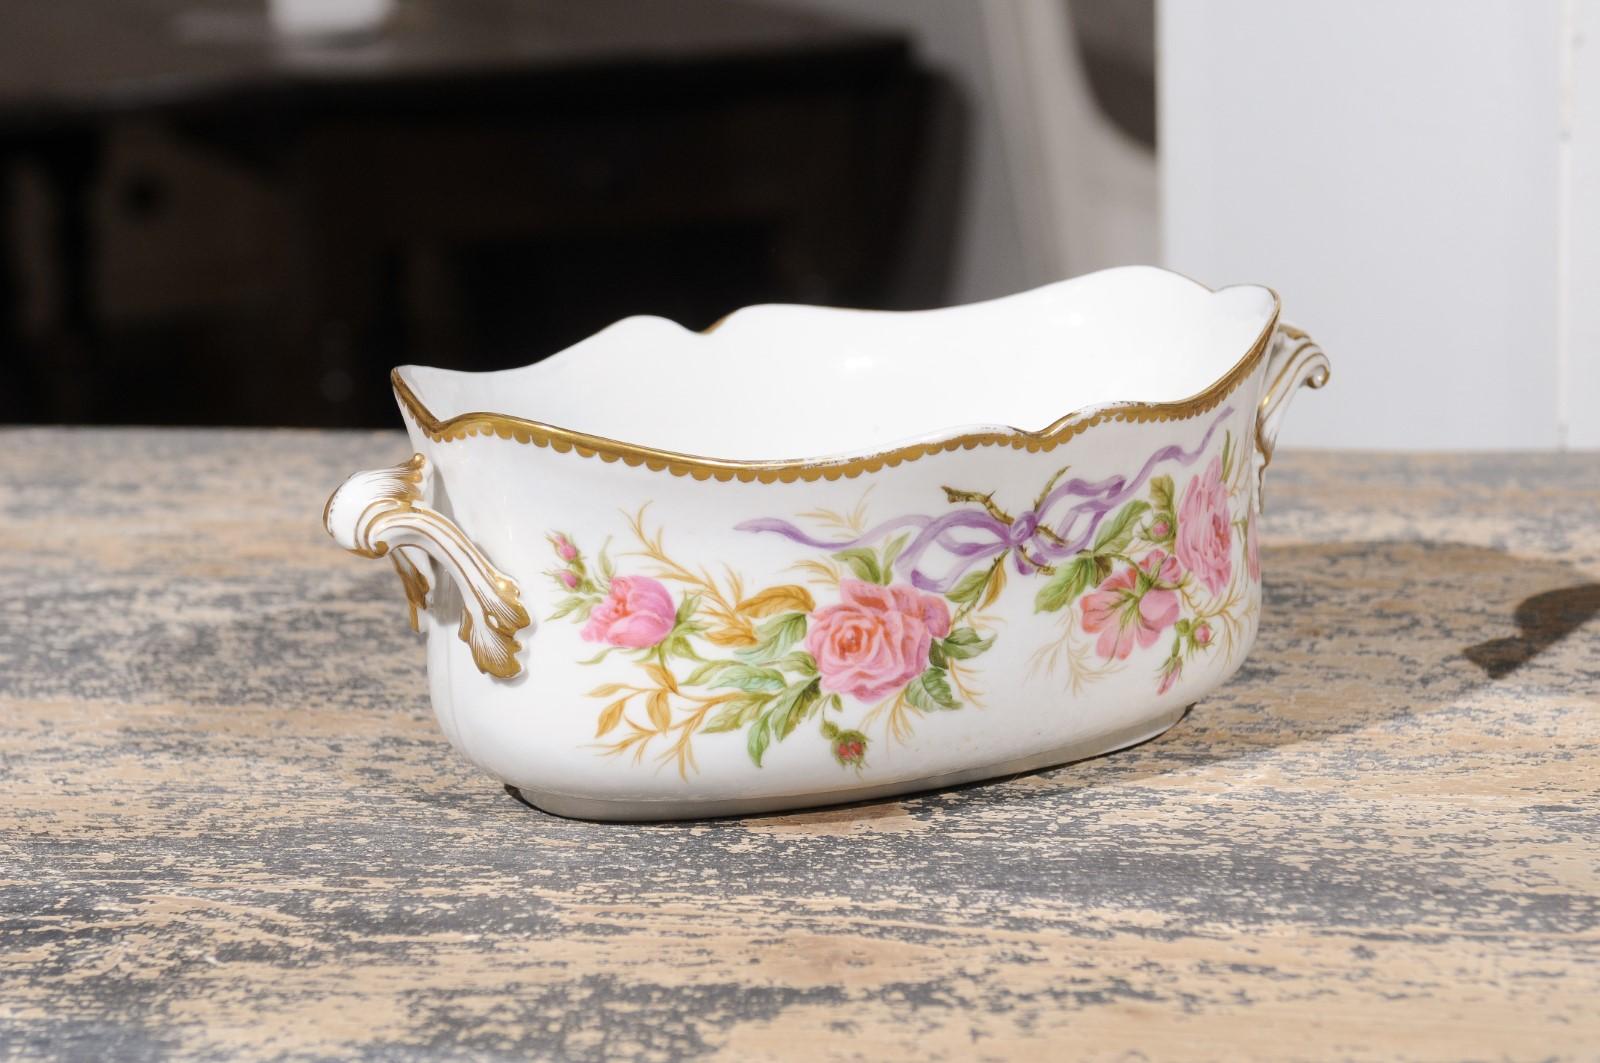 20th Century English Porcelain Bowls Depicting Bouquets of Pink Roses with Gilt Accents